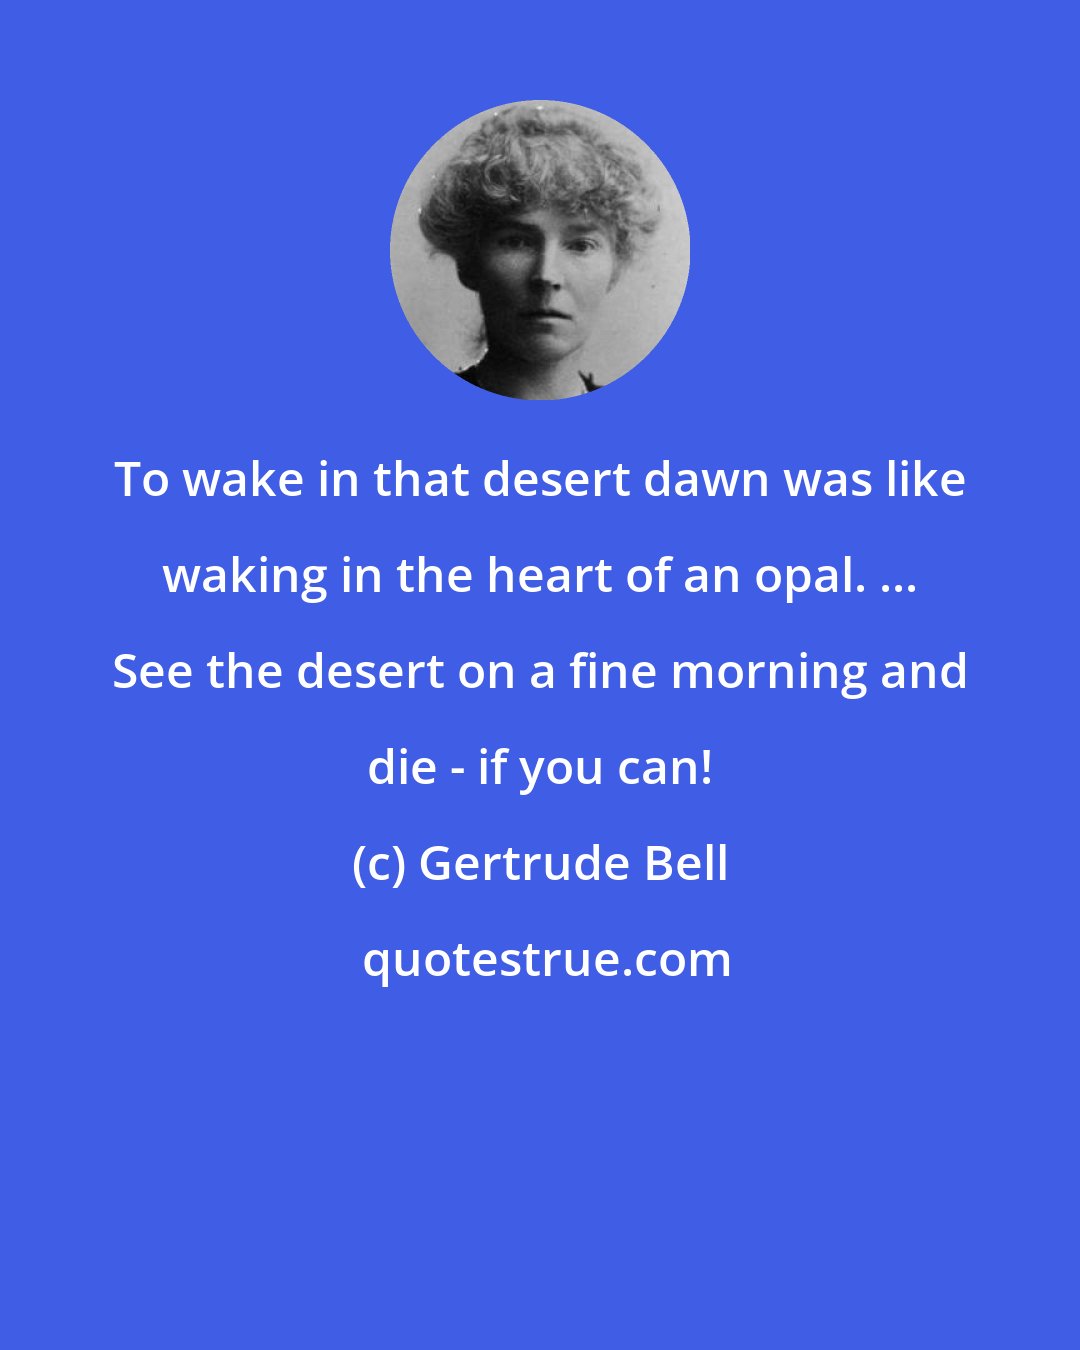 Gertrude Bell: To wake in that desert dawn was like waking in the heart of an opal. ... See the desert on a fine morning and die - if you can!